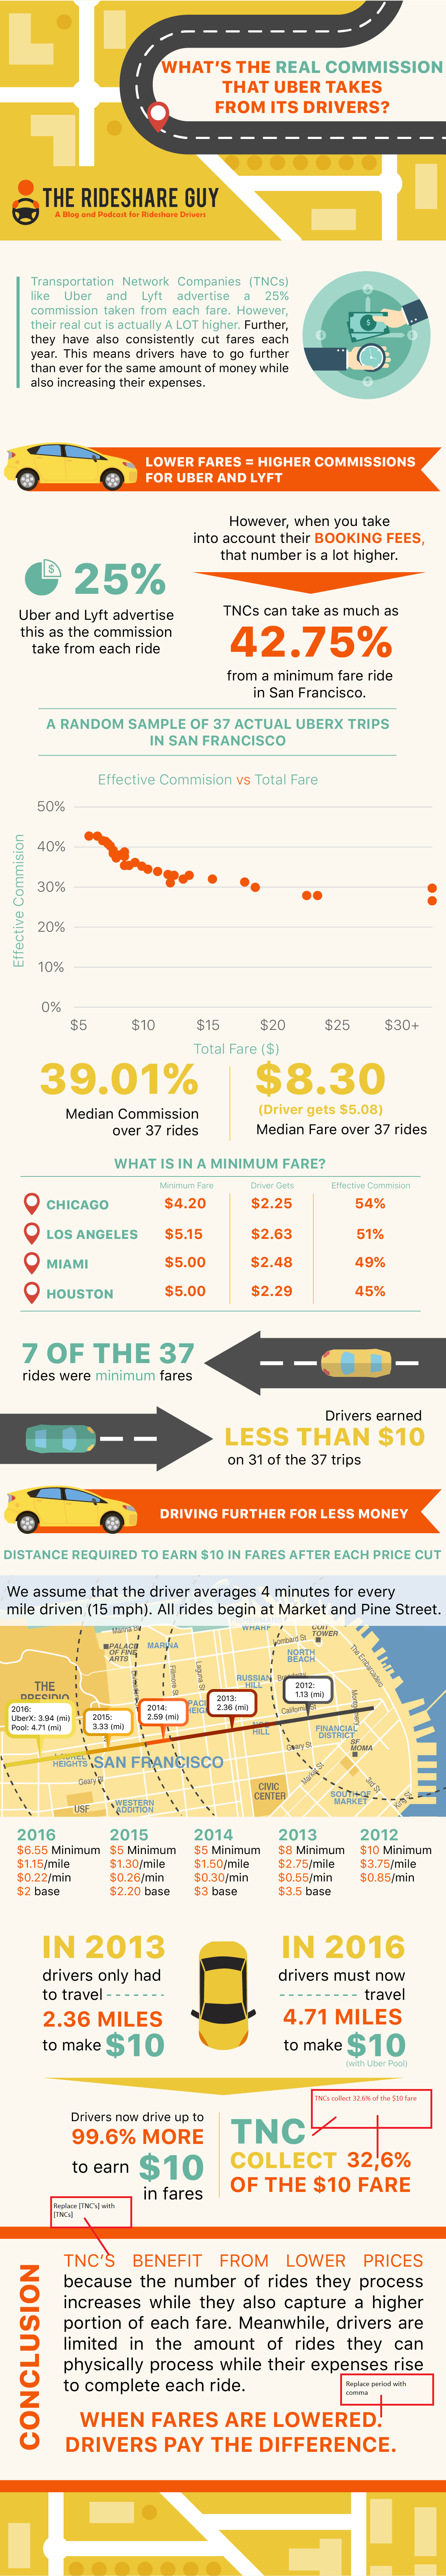 What’s The Real Commission That Uber Takes From Its Drivers? [Infographic]